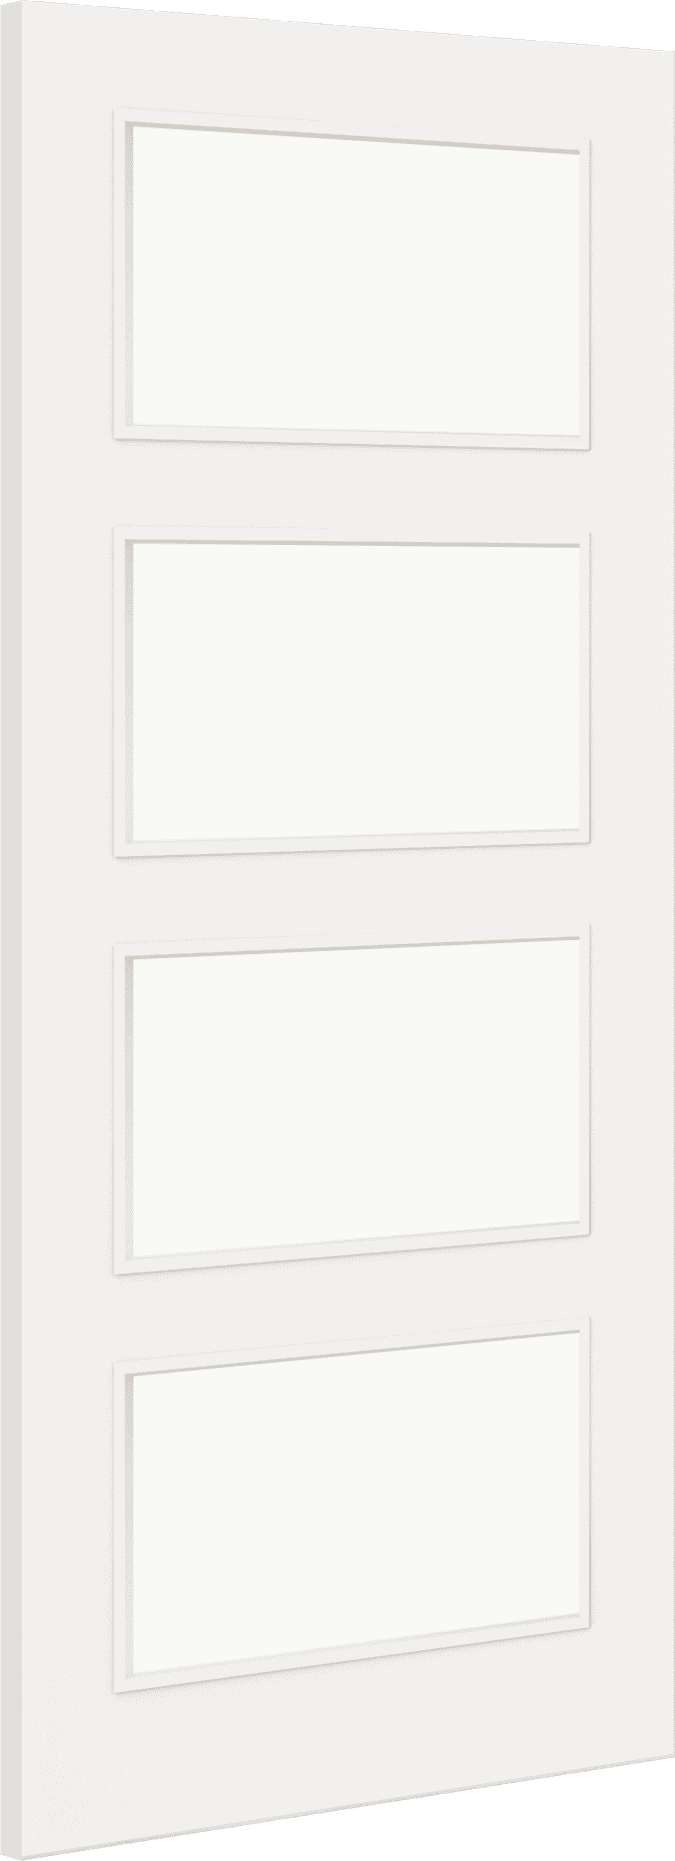 1981mm x 533mm x 44mm (21") Architectural Paint Grade White 04 Clear Glazed Fire Door Blank